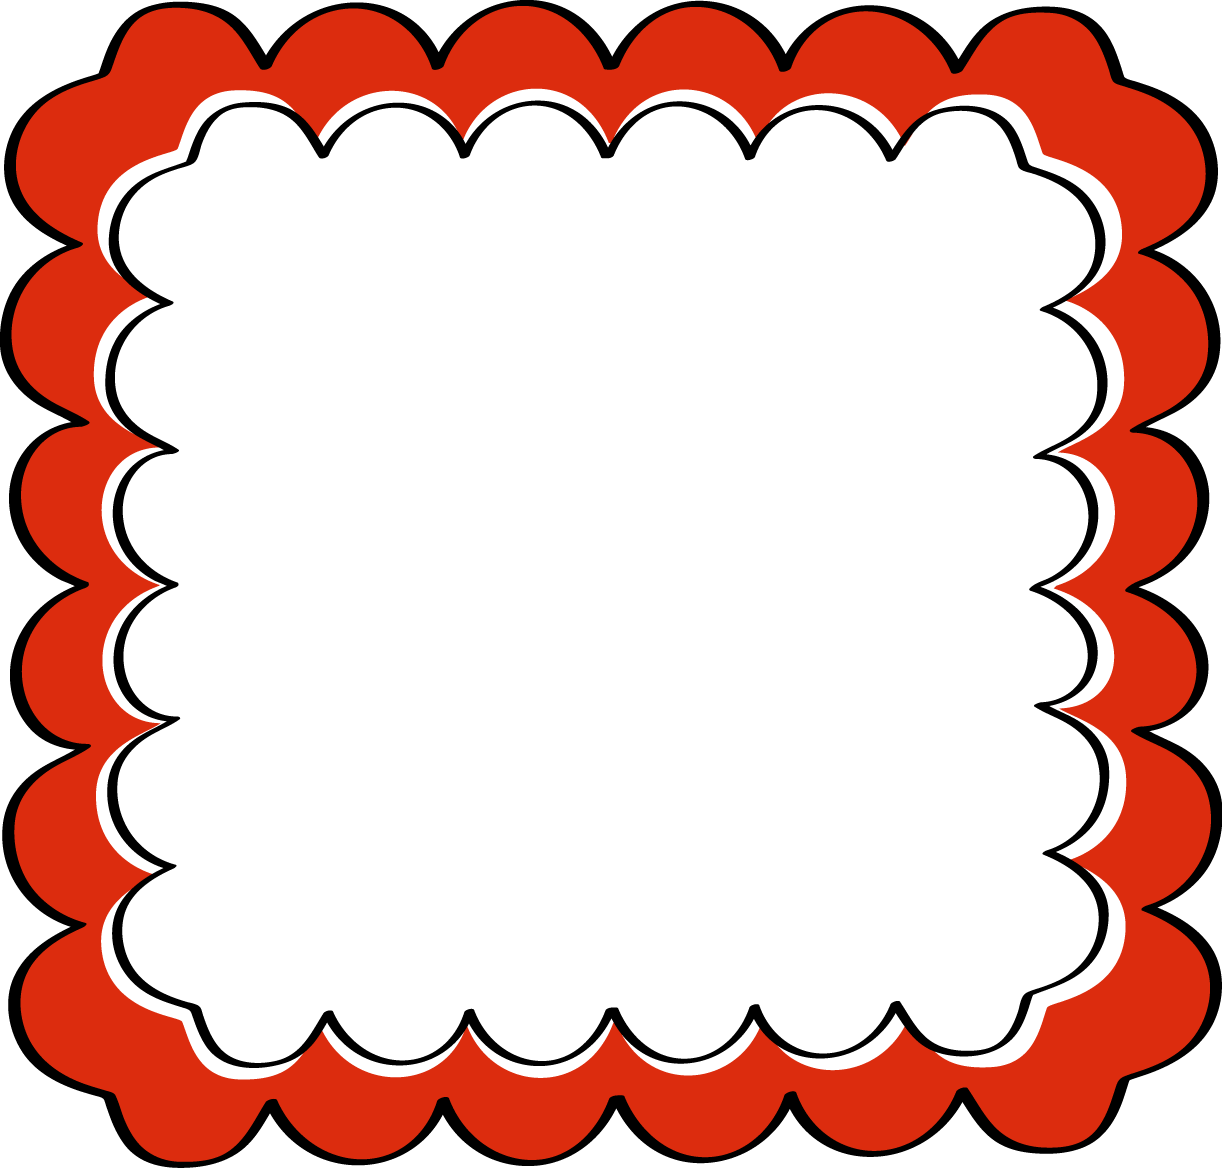 free clipart of frames - photo #27